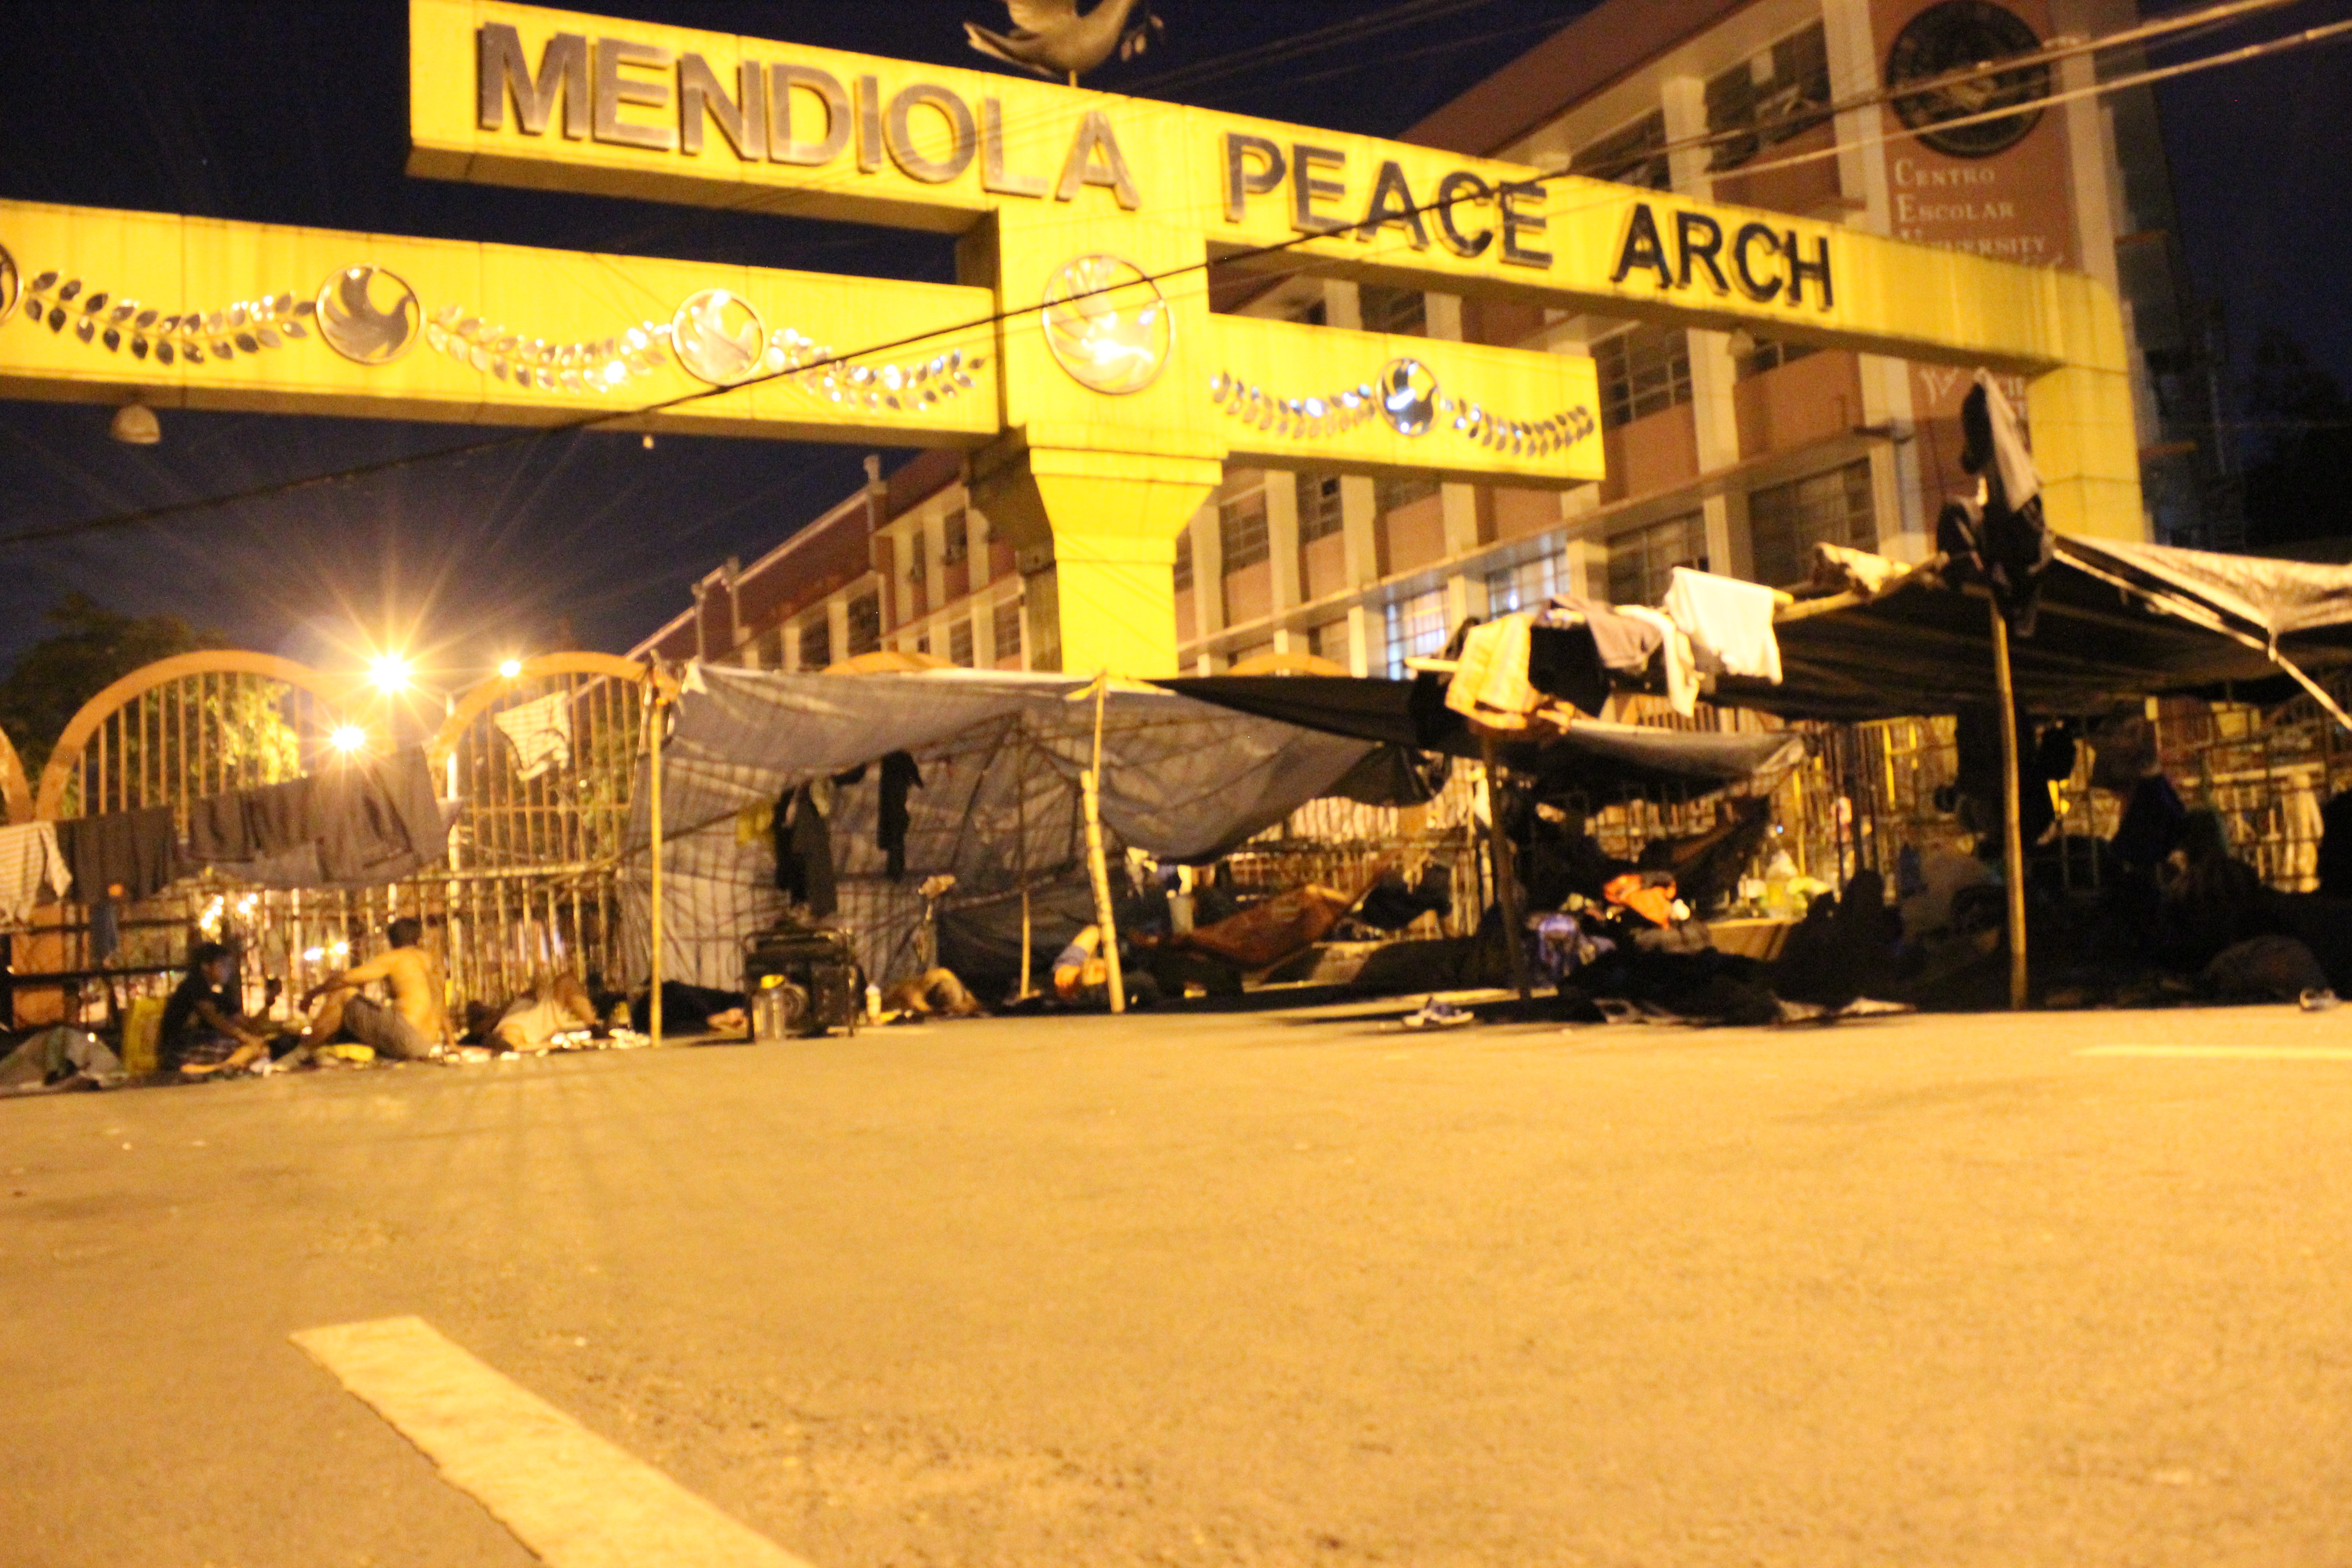 Camping out at the Mendiola Peace Arch